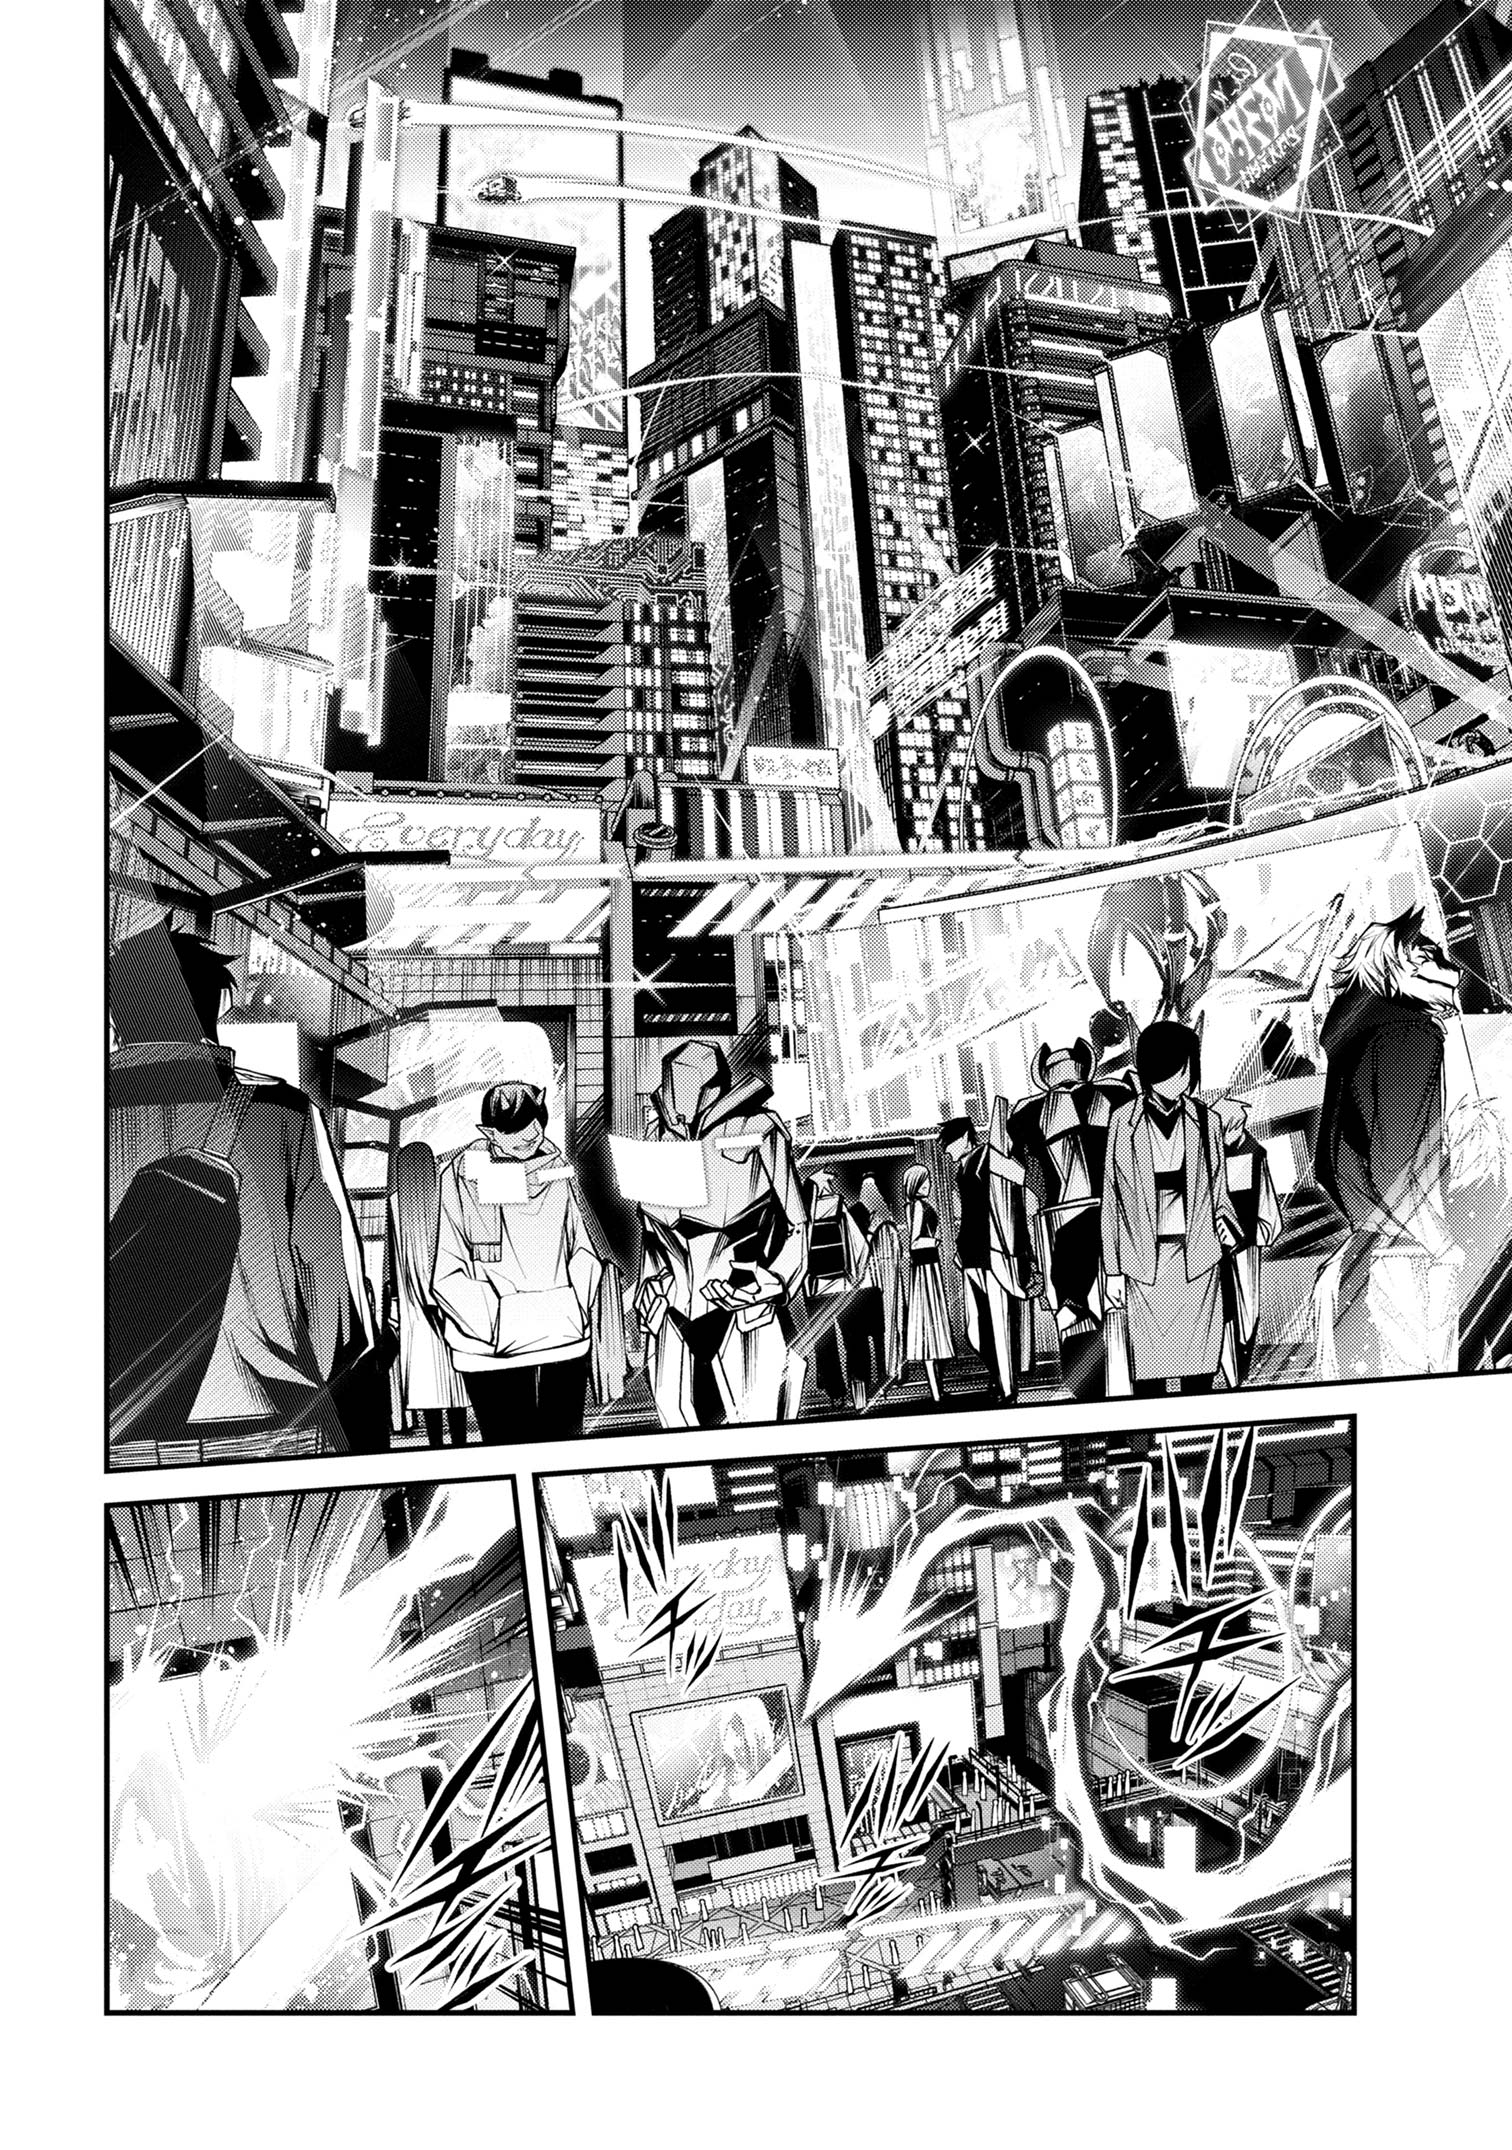 Maou 2099 - Chapter 13.1 - Page 6